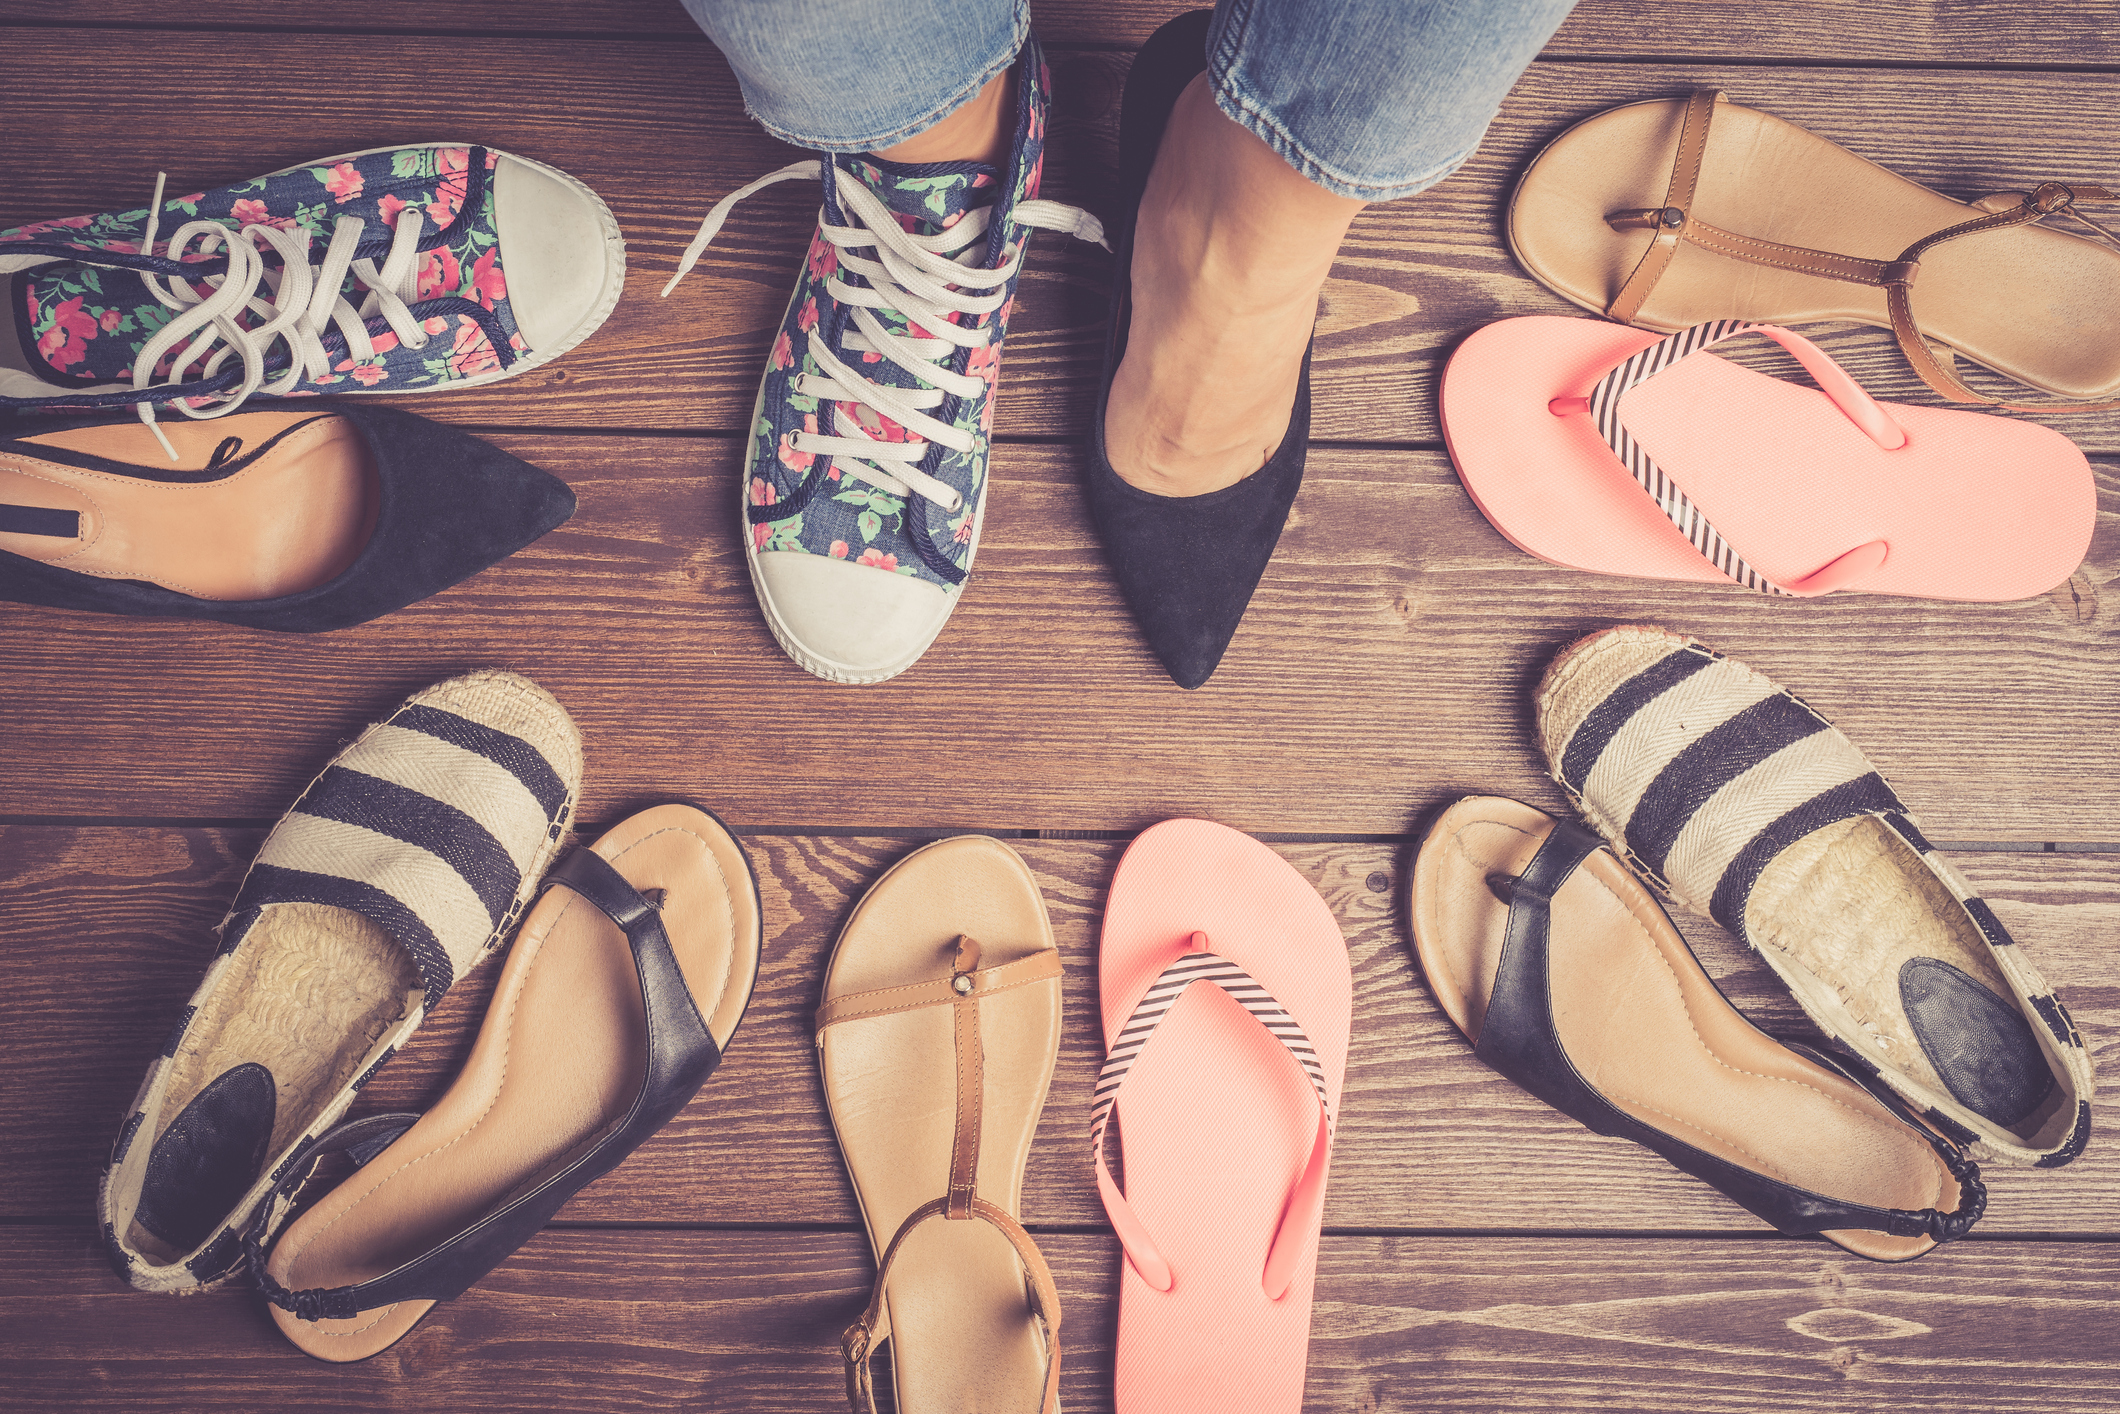 Collection of female shoes on wooden floor.